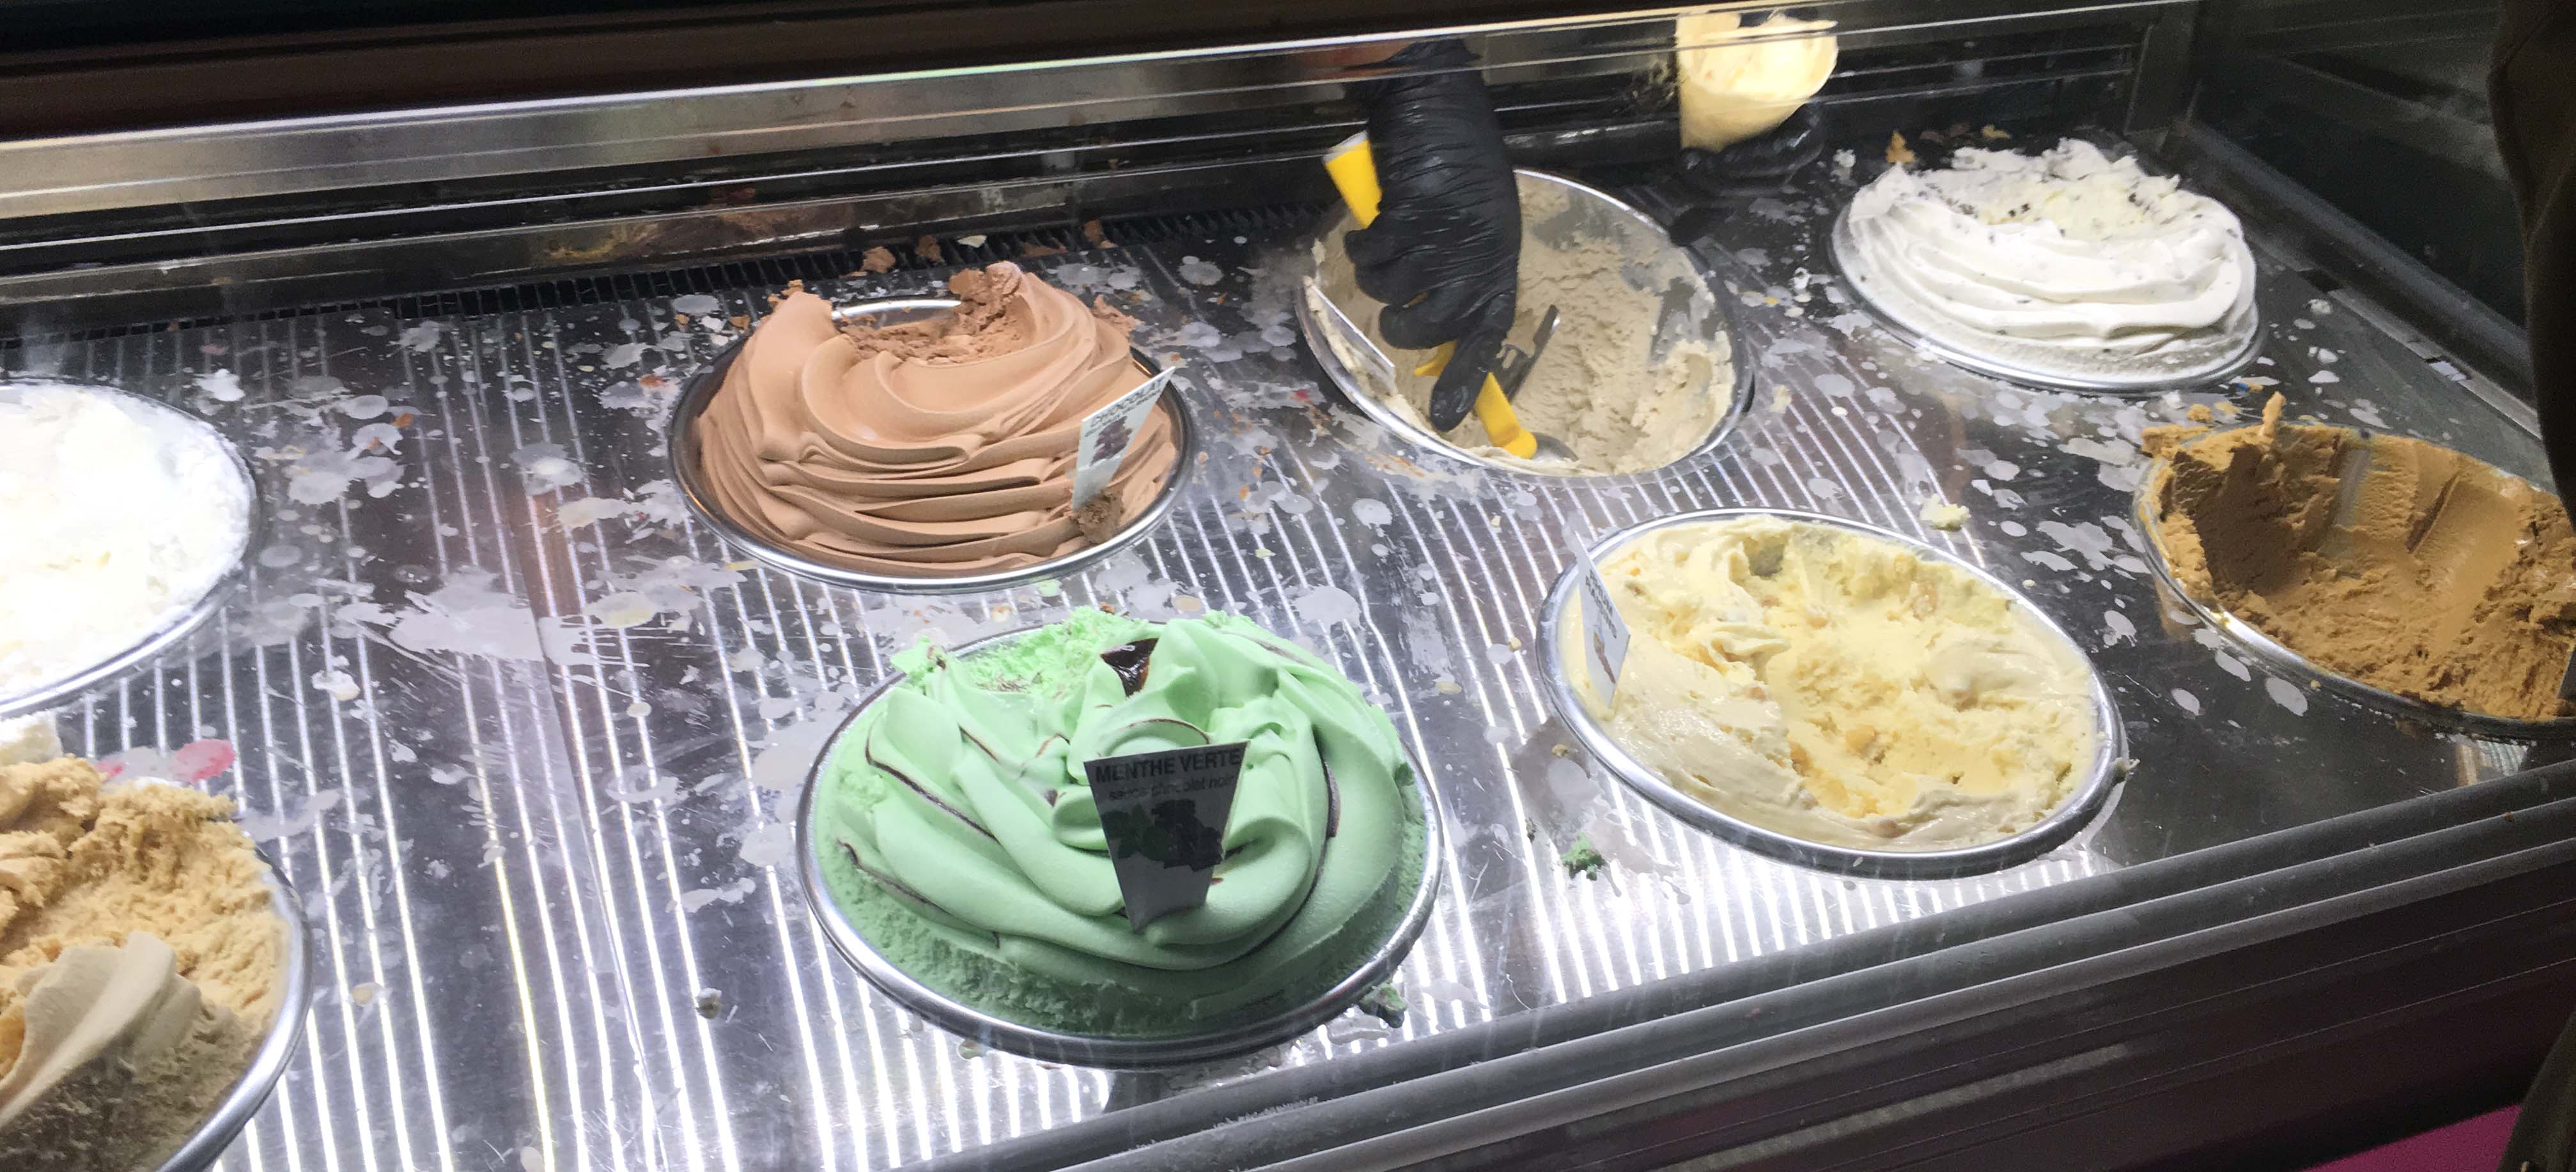 Le District ice cream selections